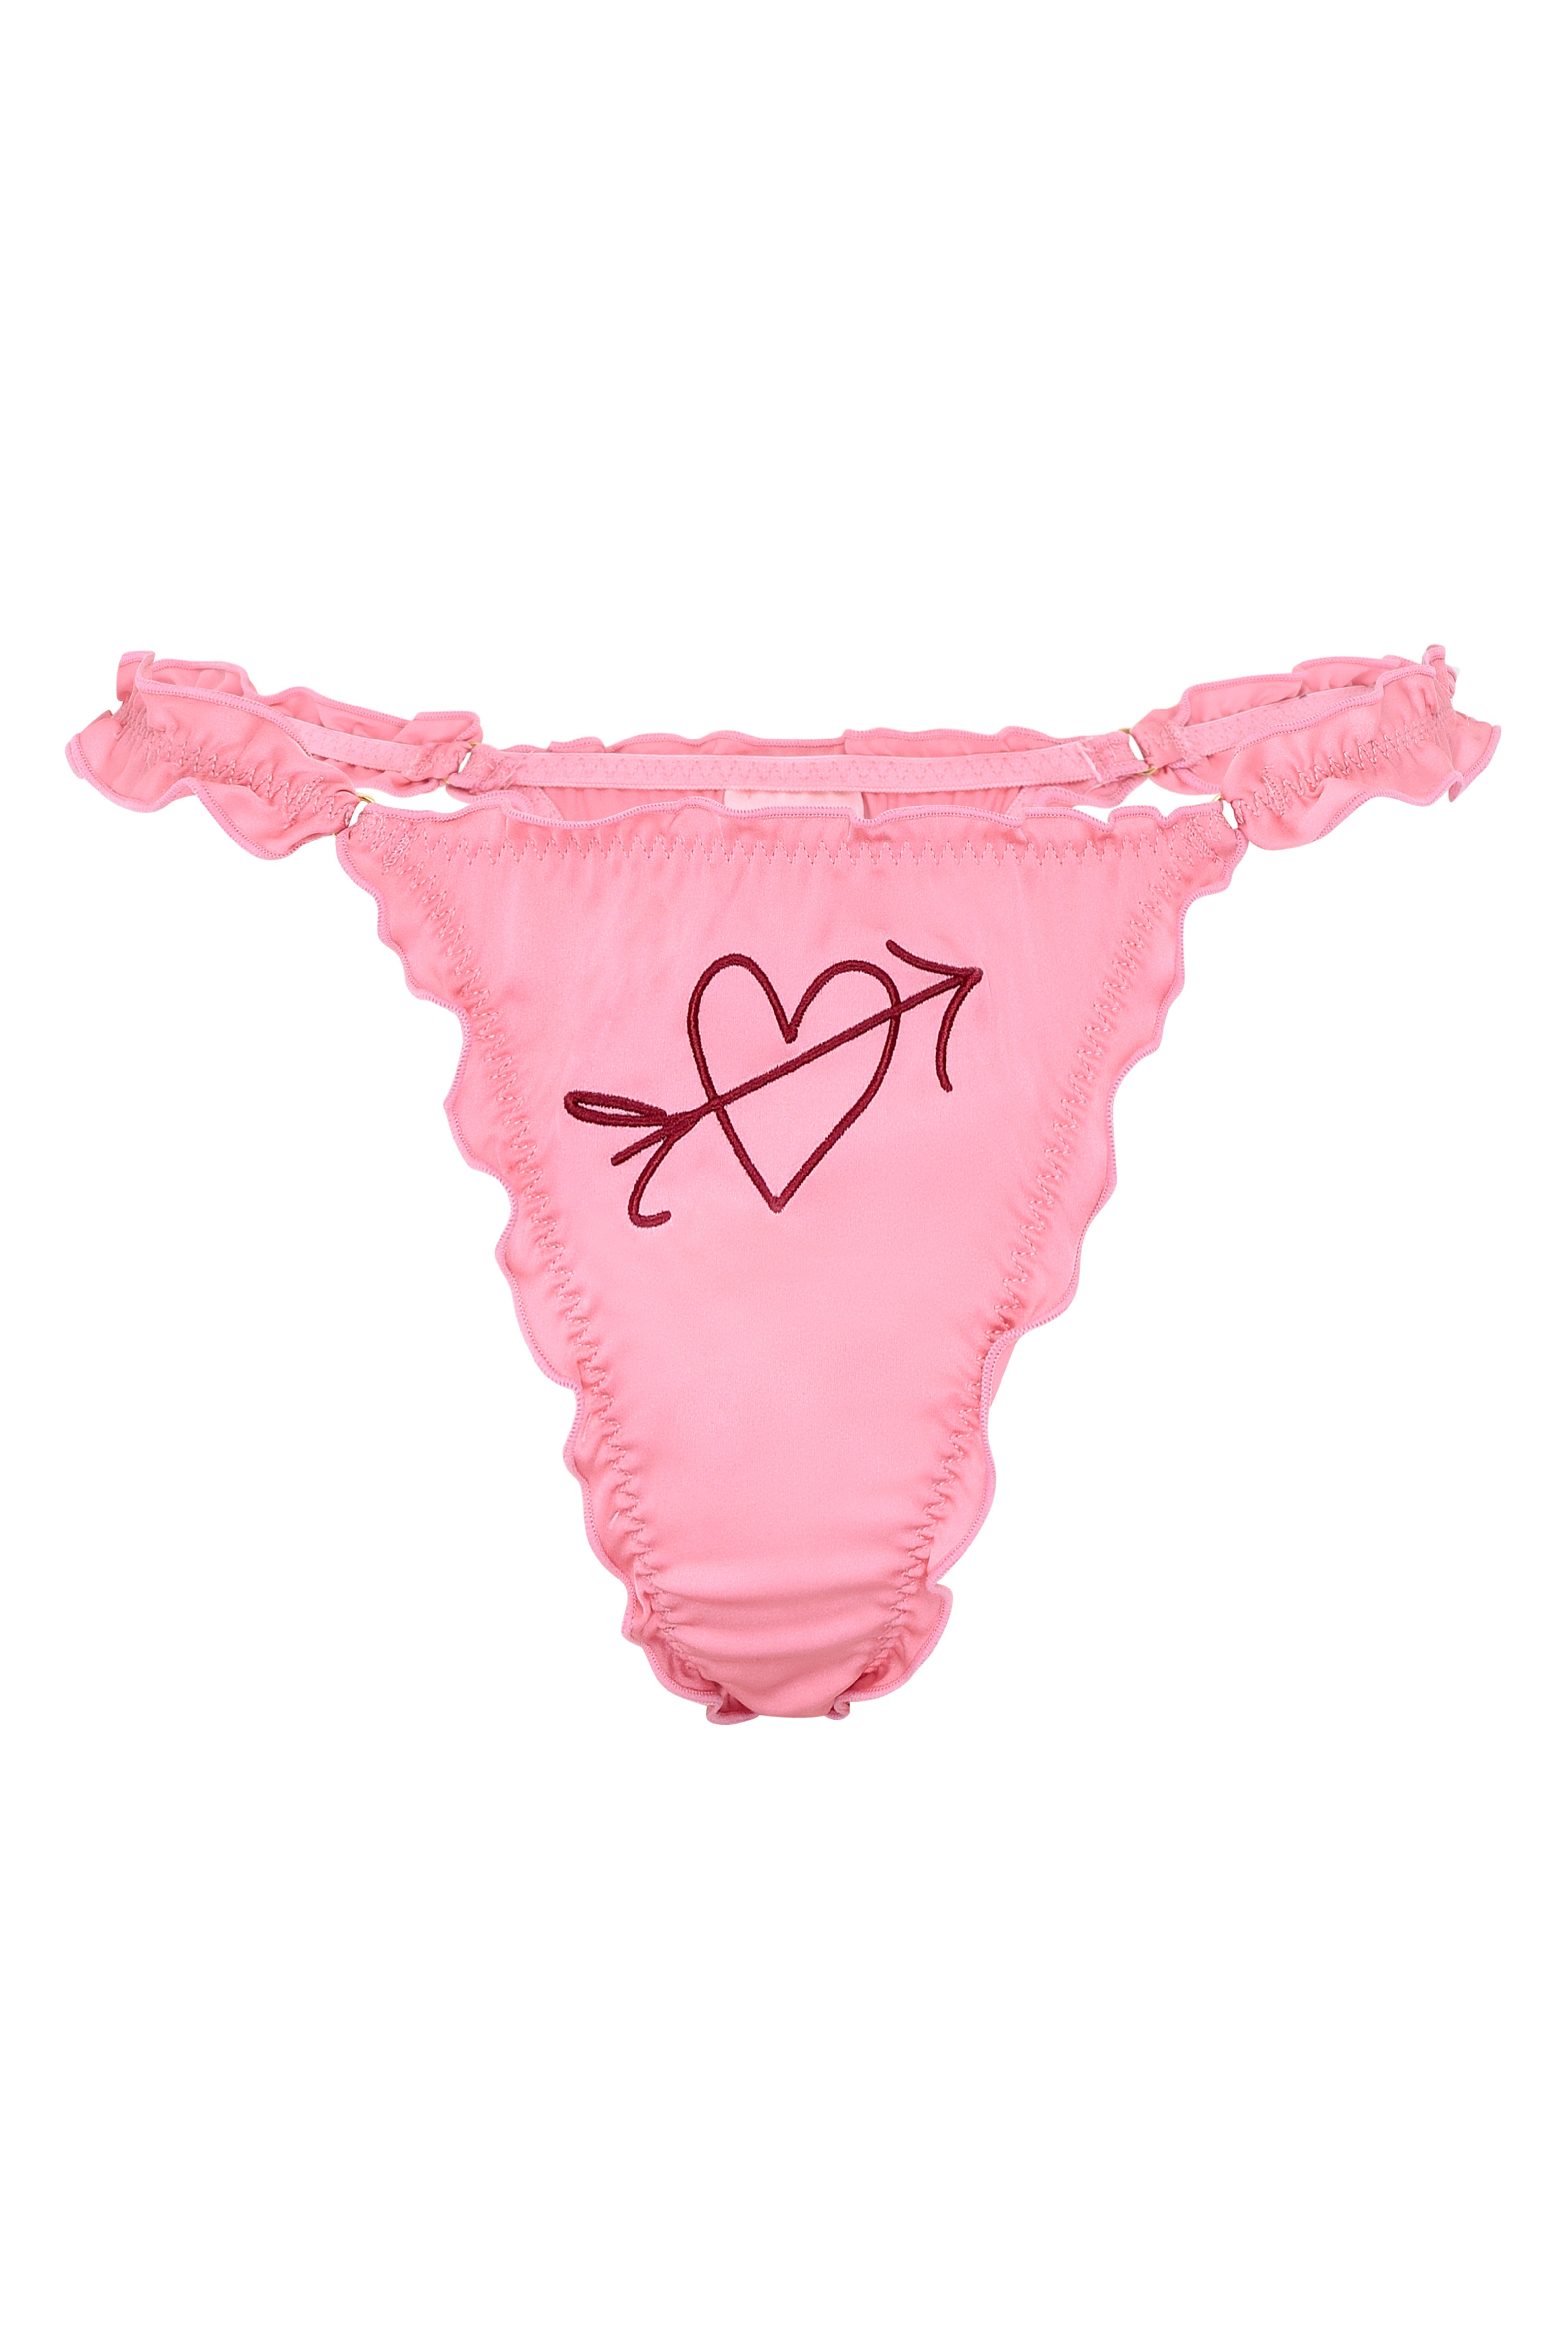 Secret Male G string Thong with Ruffle Top White and Pink